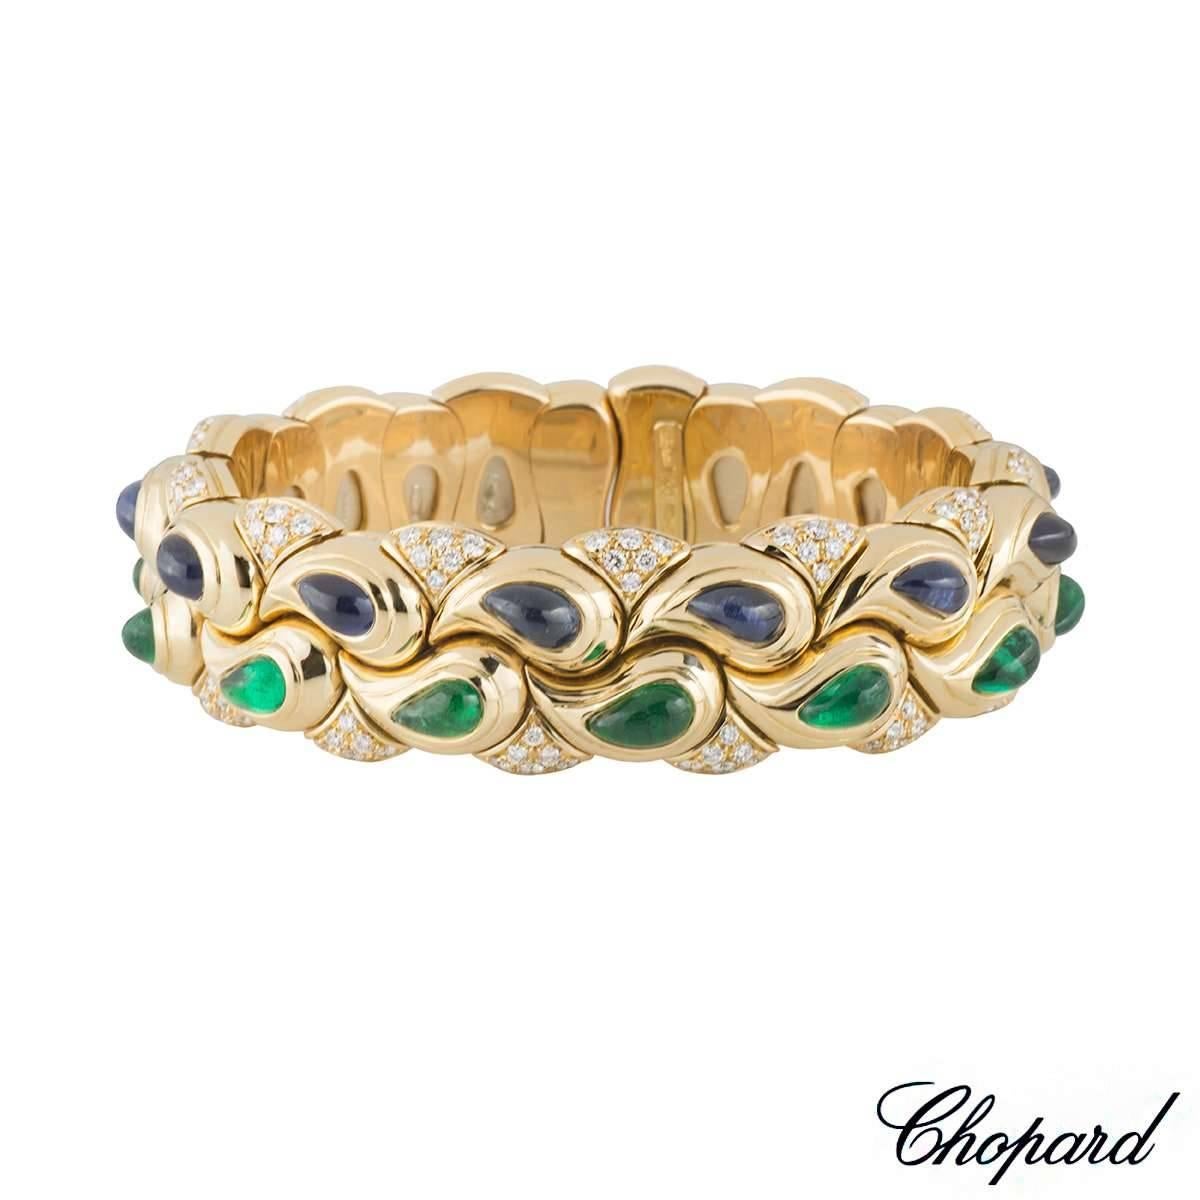 A unique 18k yellow gold Chopard bangle from the Casmir collection. The bangle comprises of a a series of drop motifs set with cabochon sapphire and emerald gemstones. The sapphire cabochon totals approximately 6.50ct with a deep blue hue